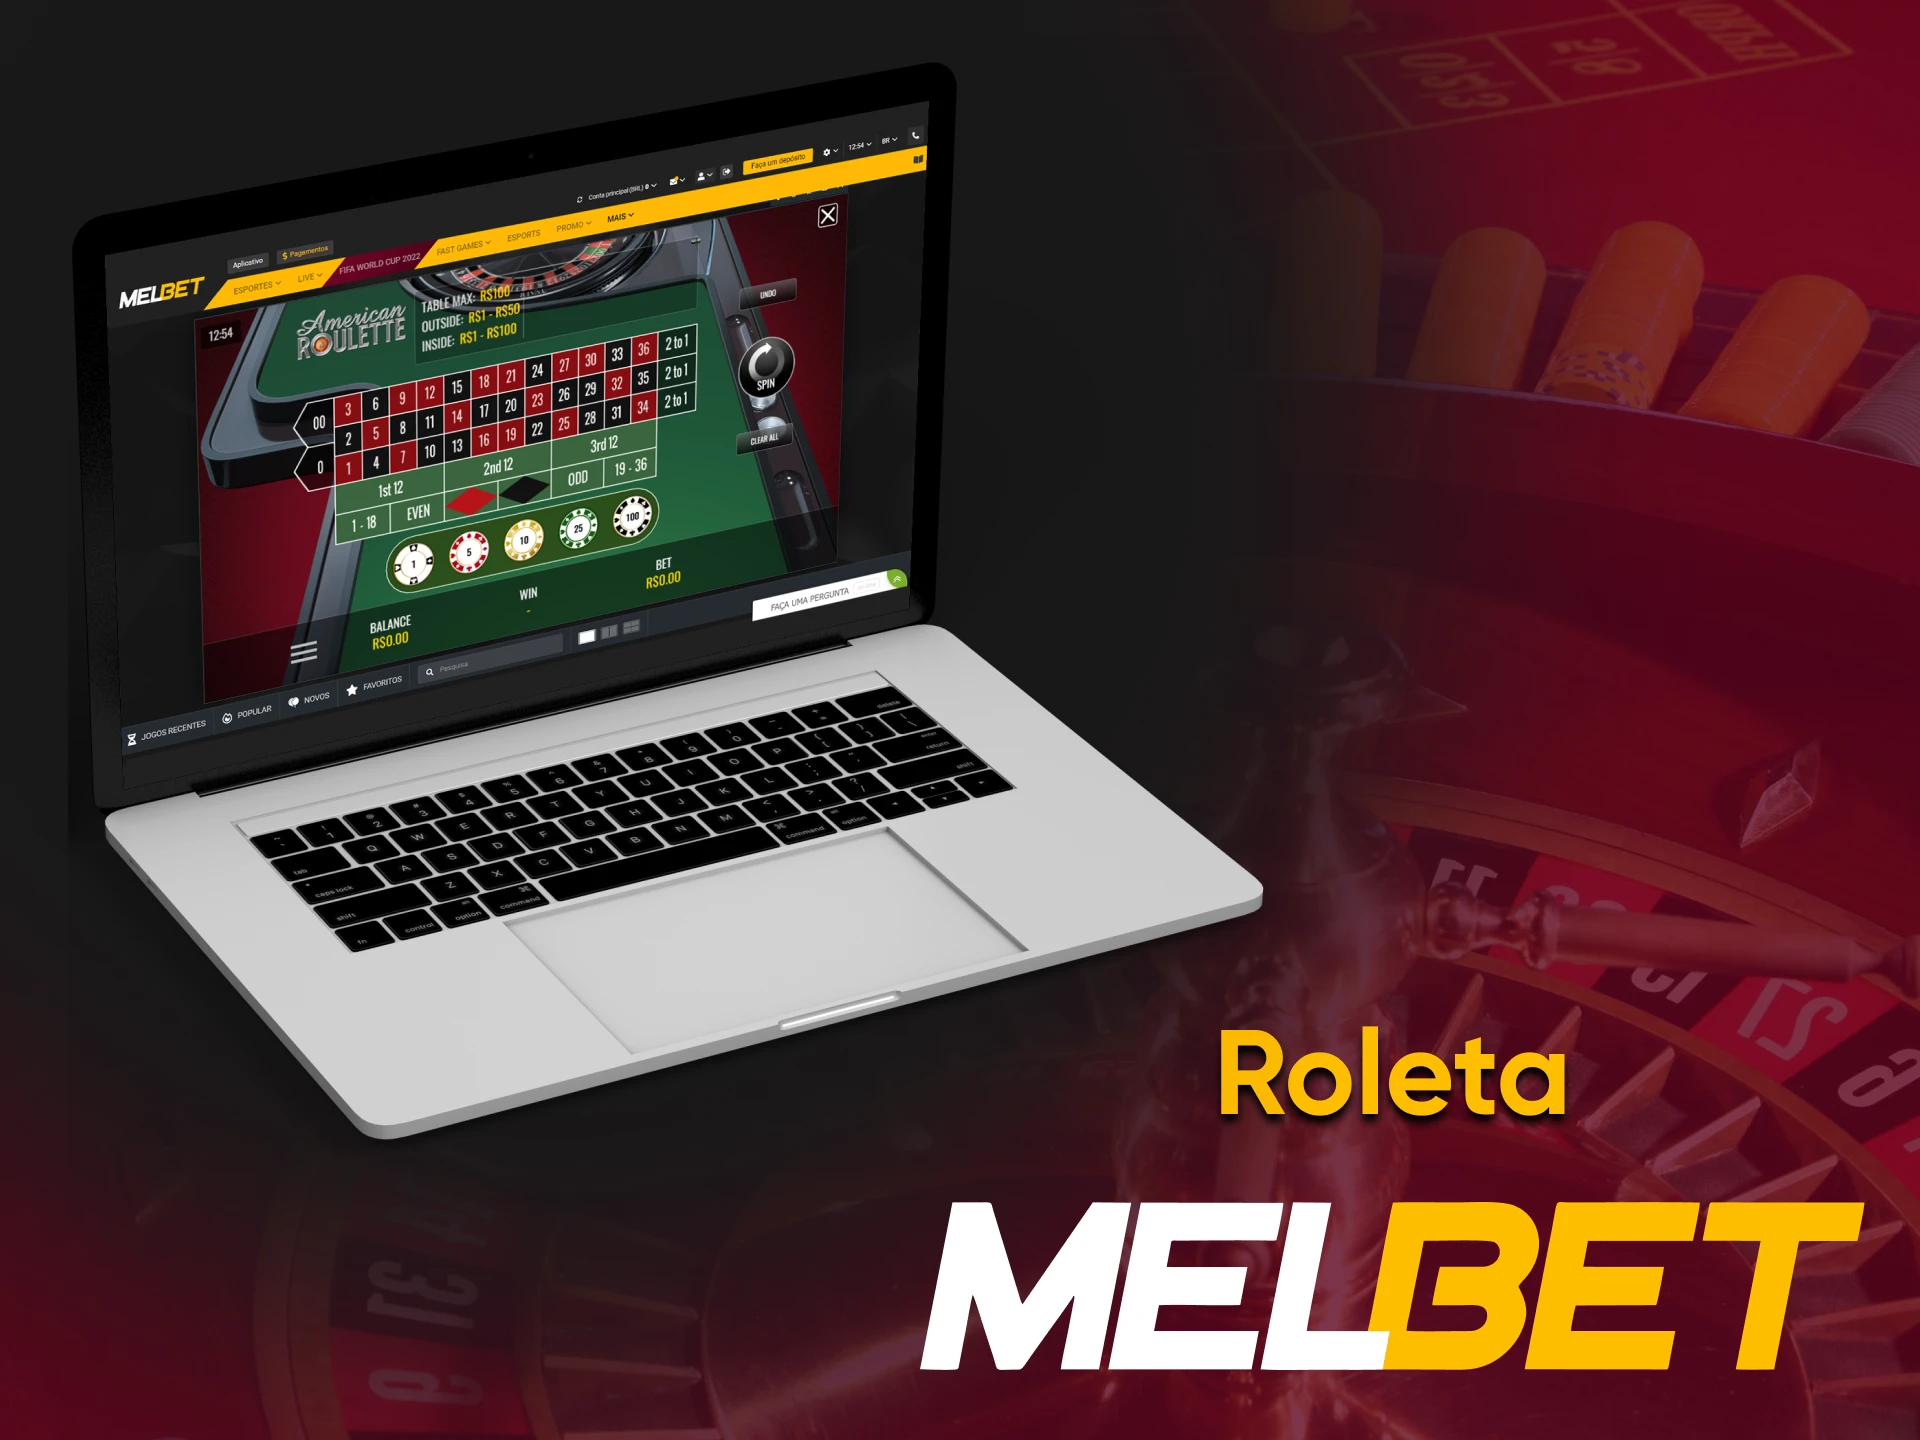 To play Melbet Roulette, go to the desired section.